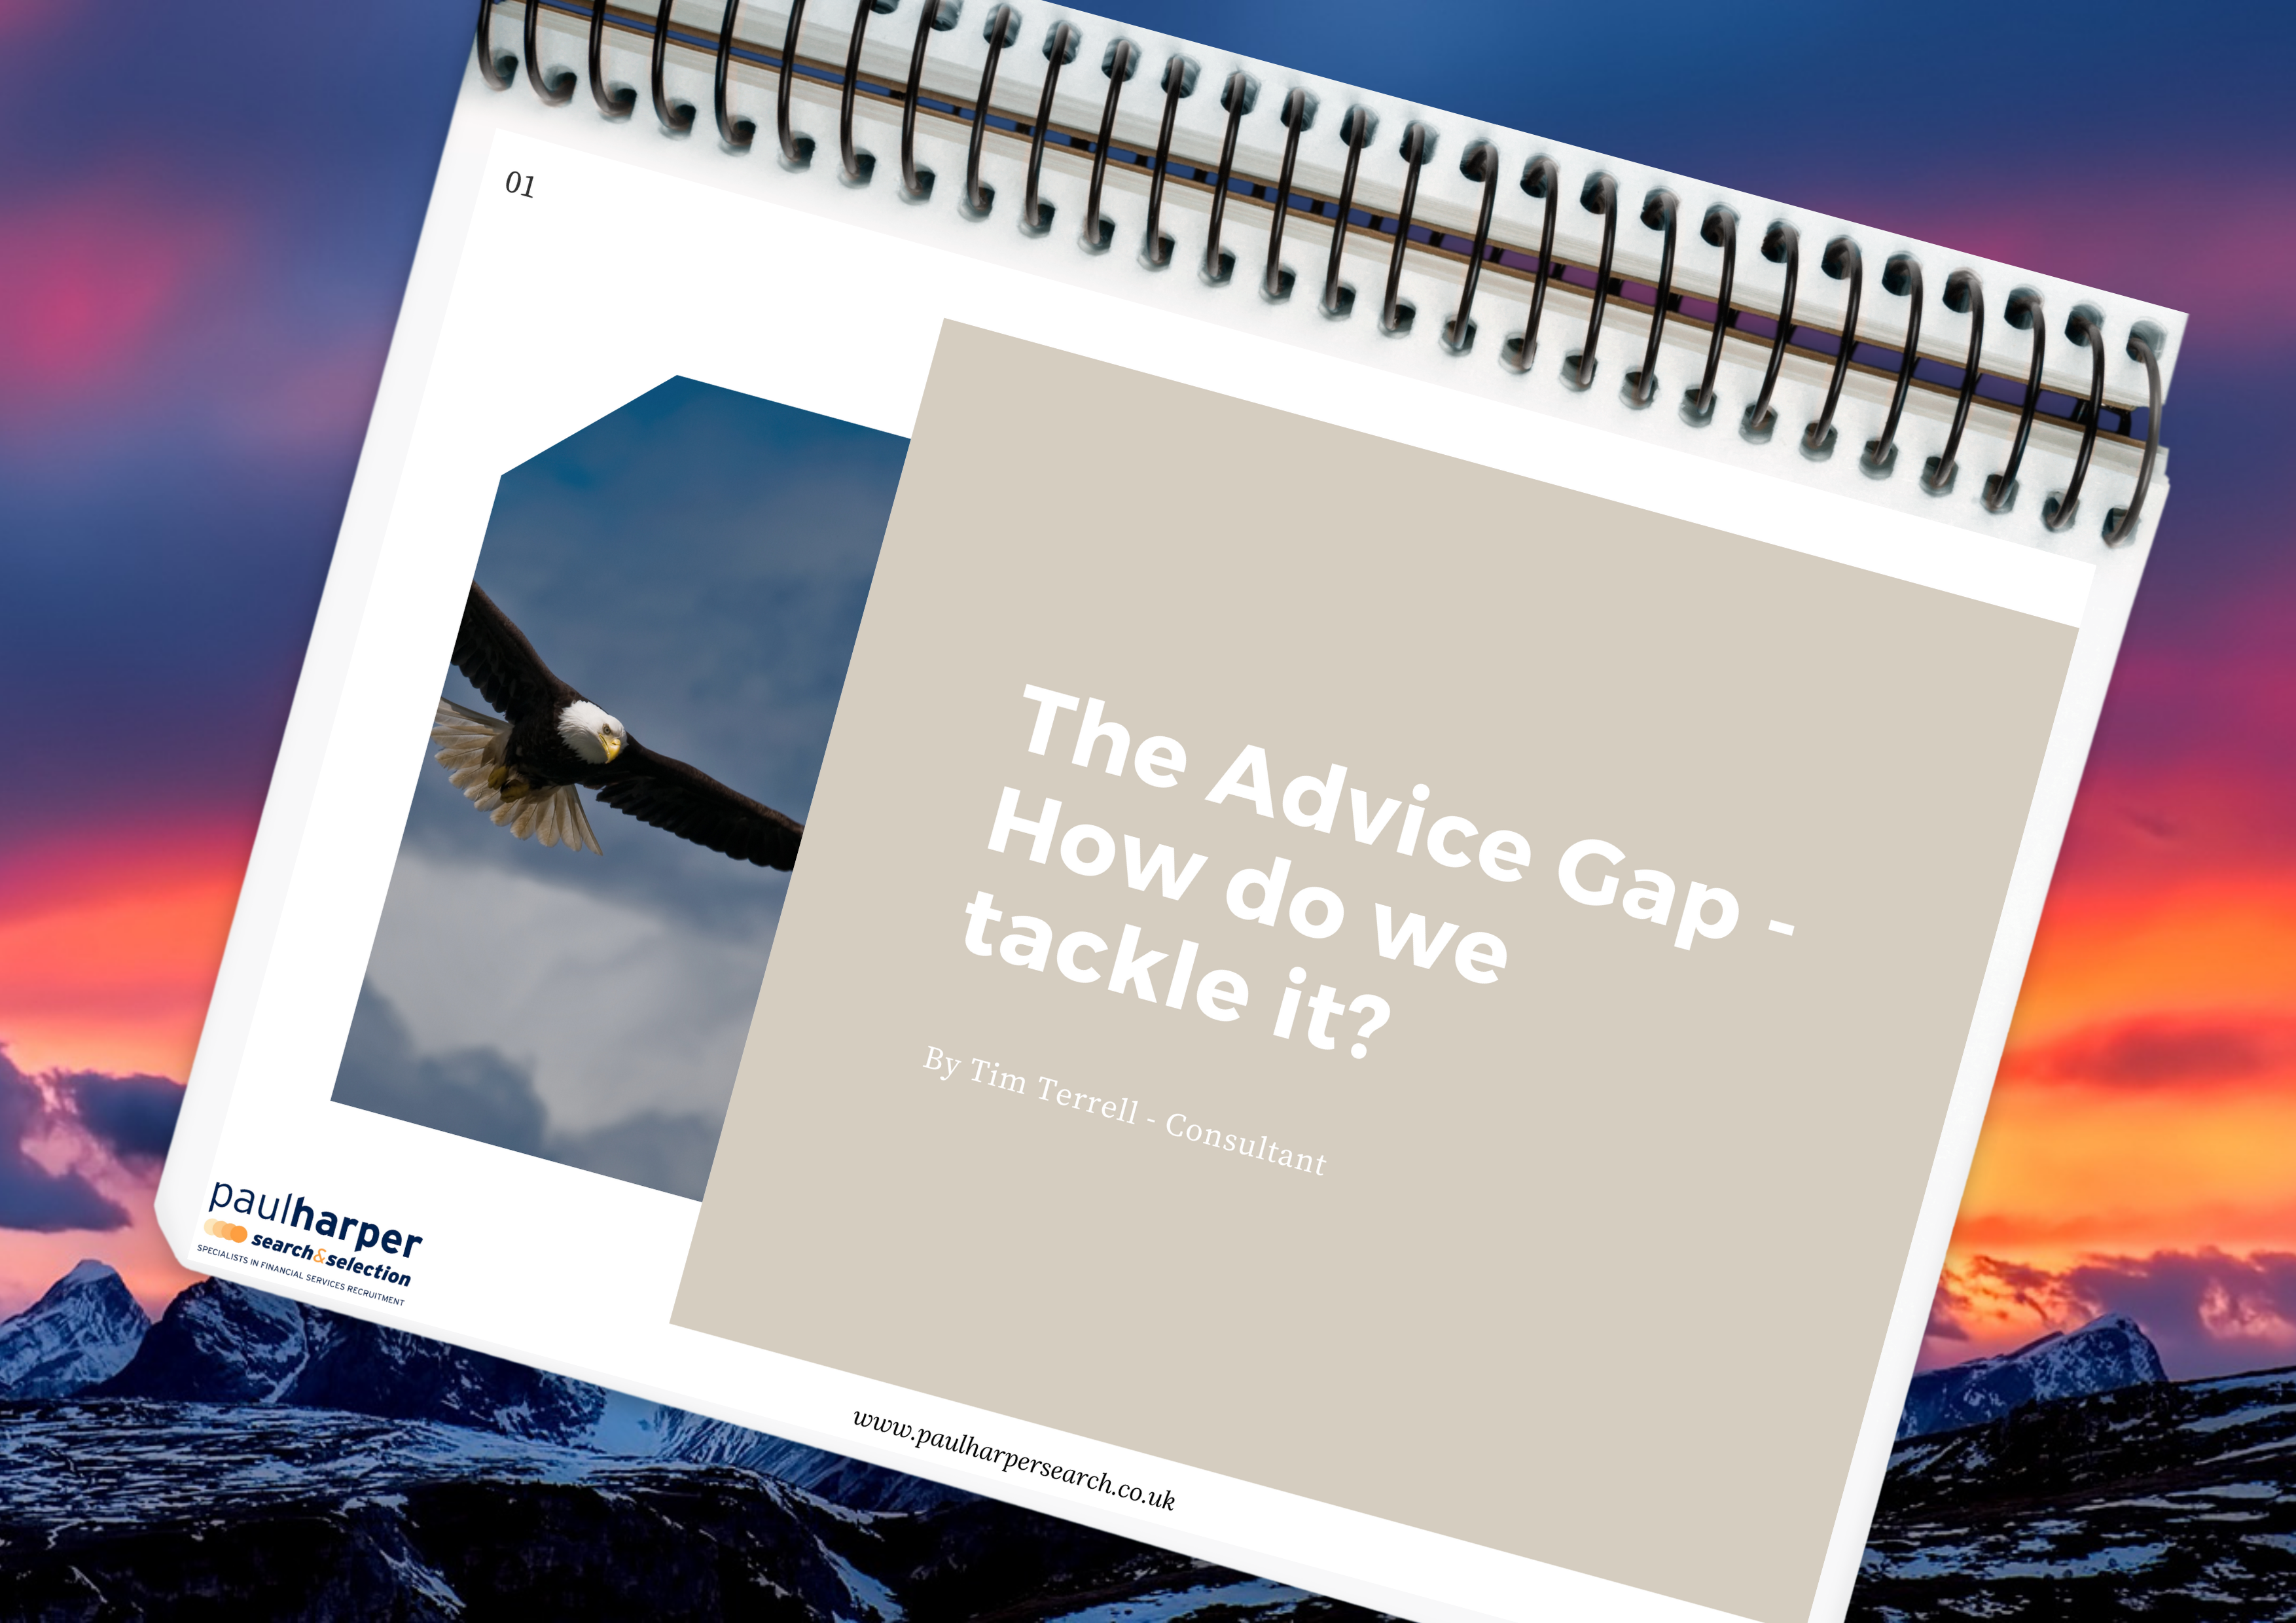 The Advice Gap by Tim Terrell